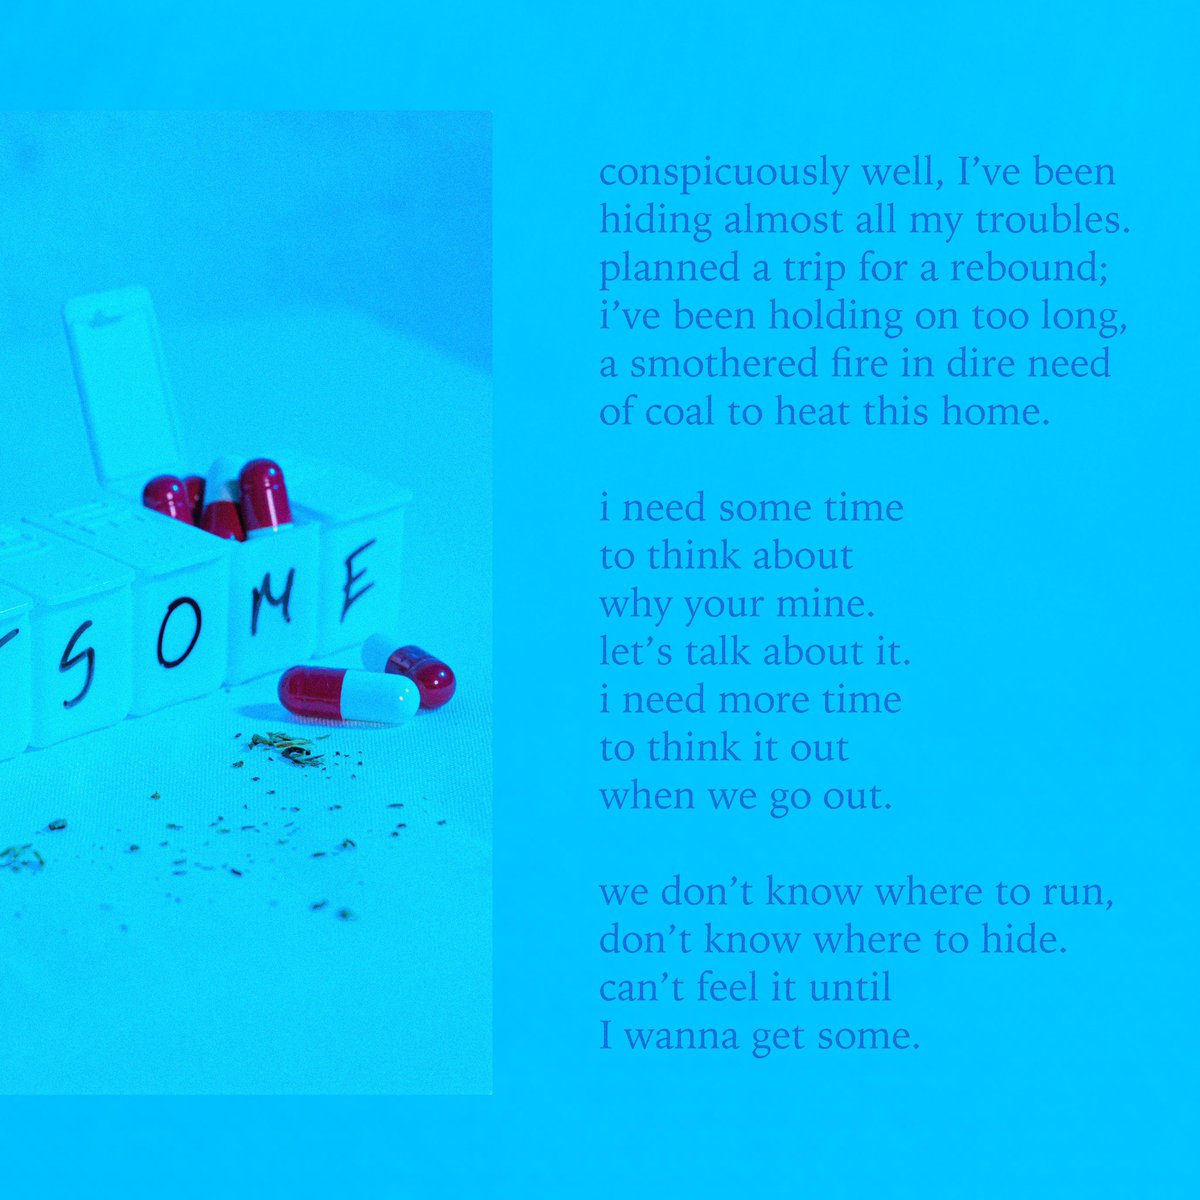 Incase you haven’t seen the last few posts from us, our new single “Get Some” is out now! Here are the lyrics so you can belt it out with us at the next gig on 28th March at Nice n Sleazy’s supporting @RosellasBand 🌹 Link in bio to grab your tickets 🎟️ See you all there!